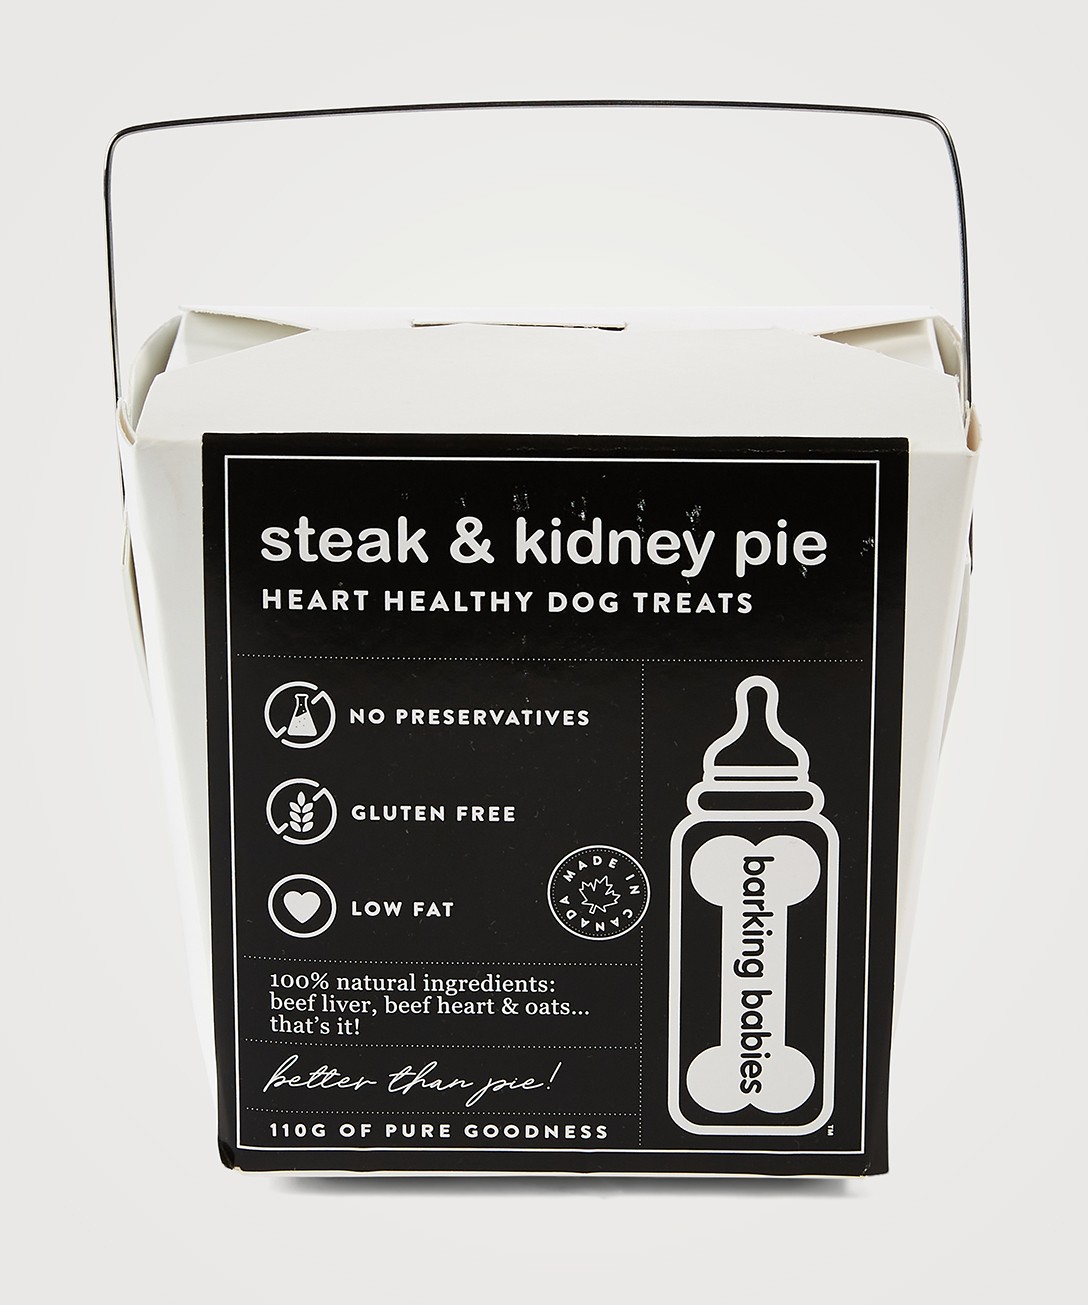 Image of a Chinese takeout-style box with a label that says "steak and kidney pie heart healthy dog treats."